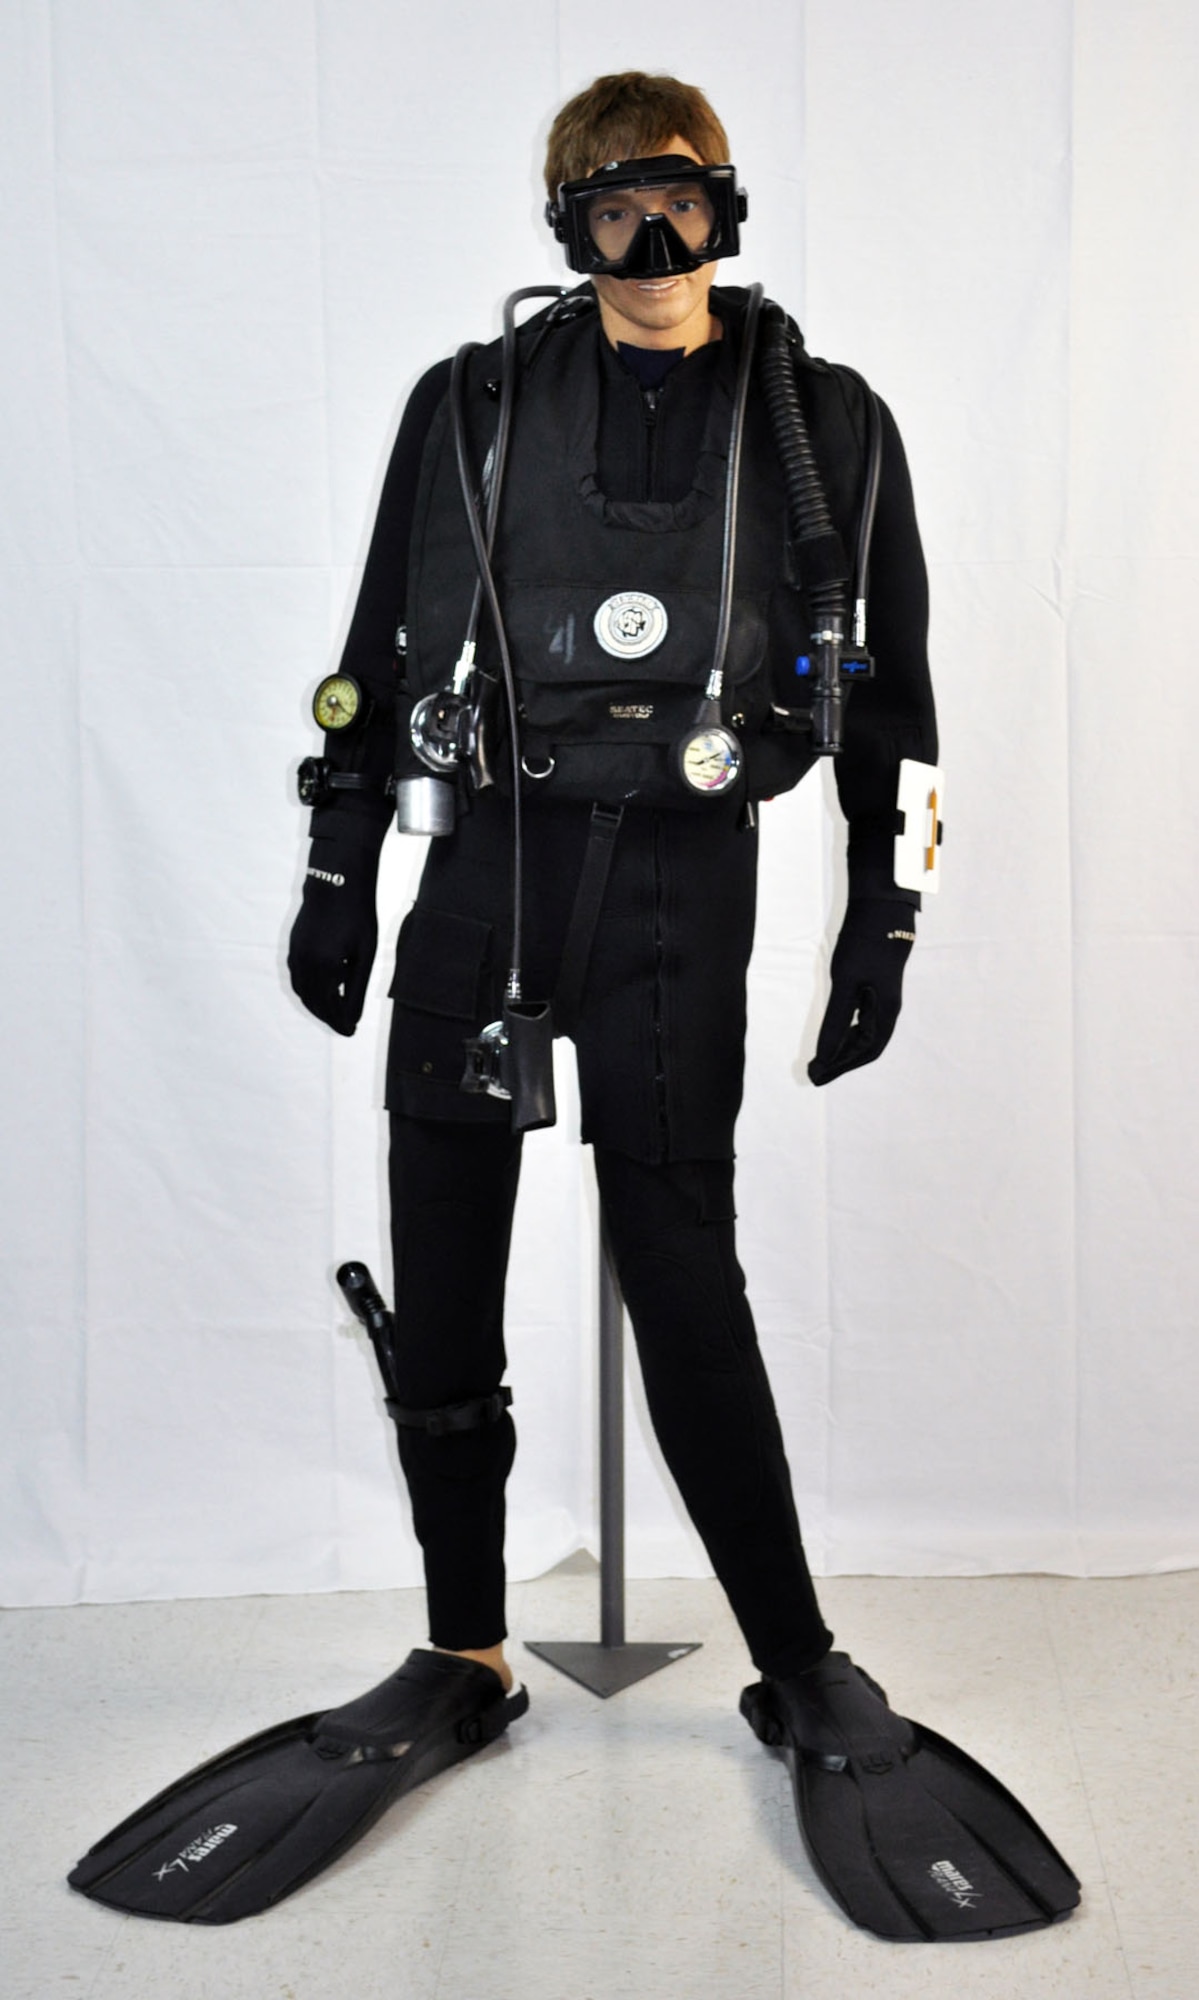 The mannequin pictured represents a pararescueman in scuba equipment used from the mid to late 1970s through the early 1990s. (U.S. Air Force photo)